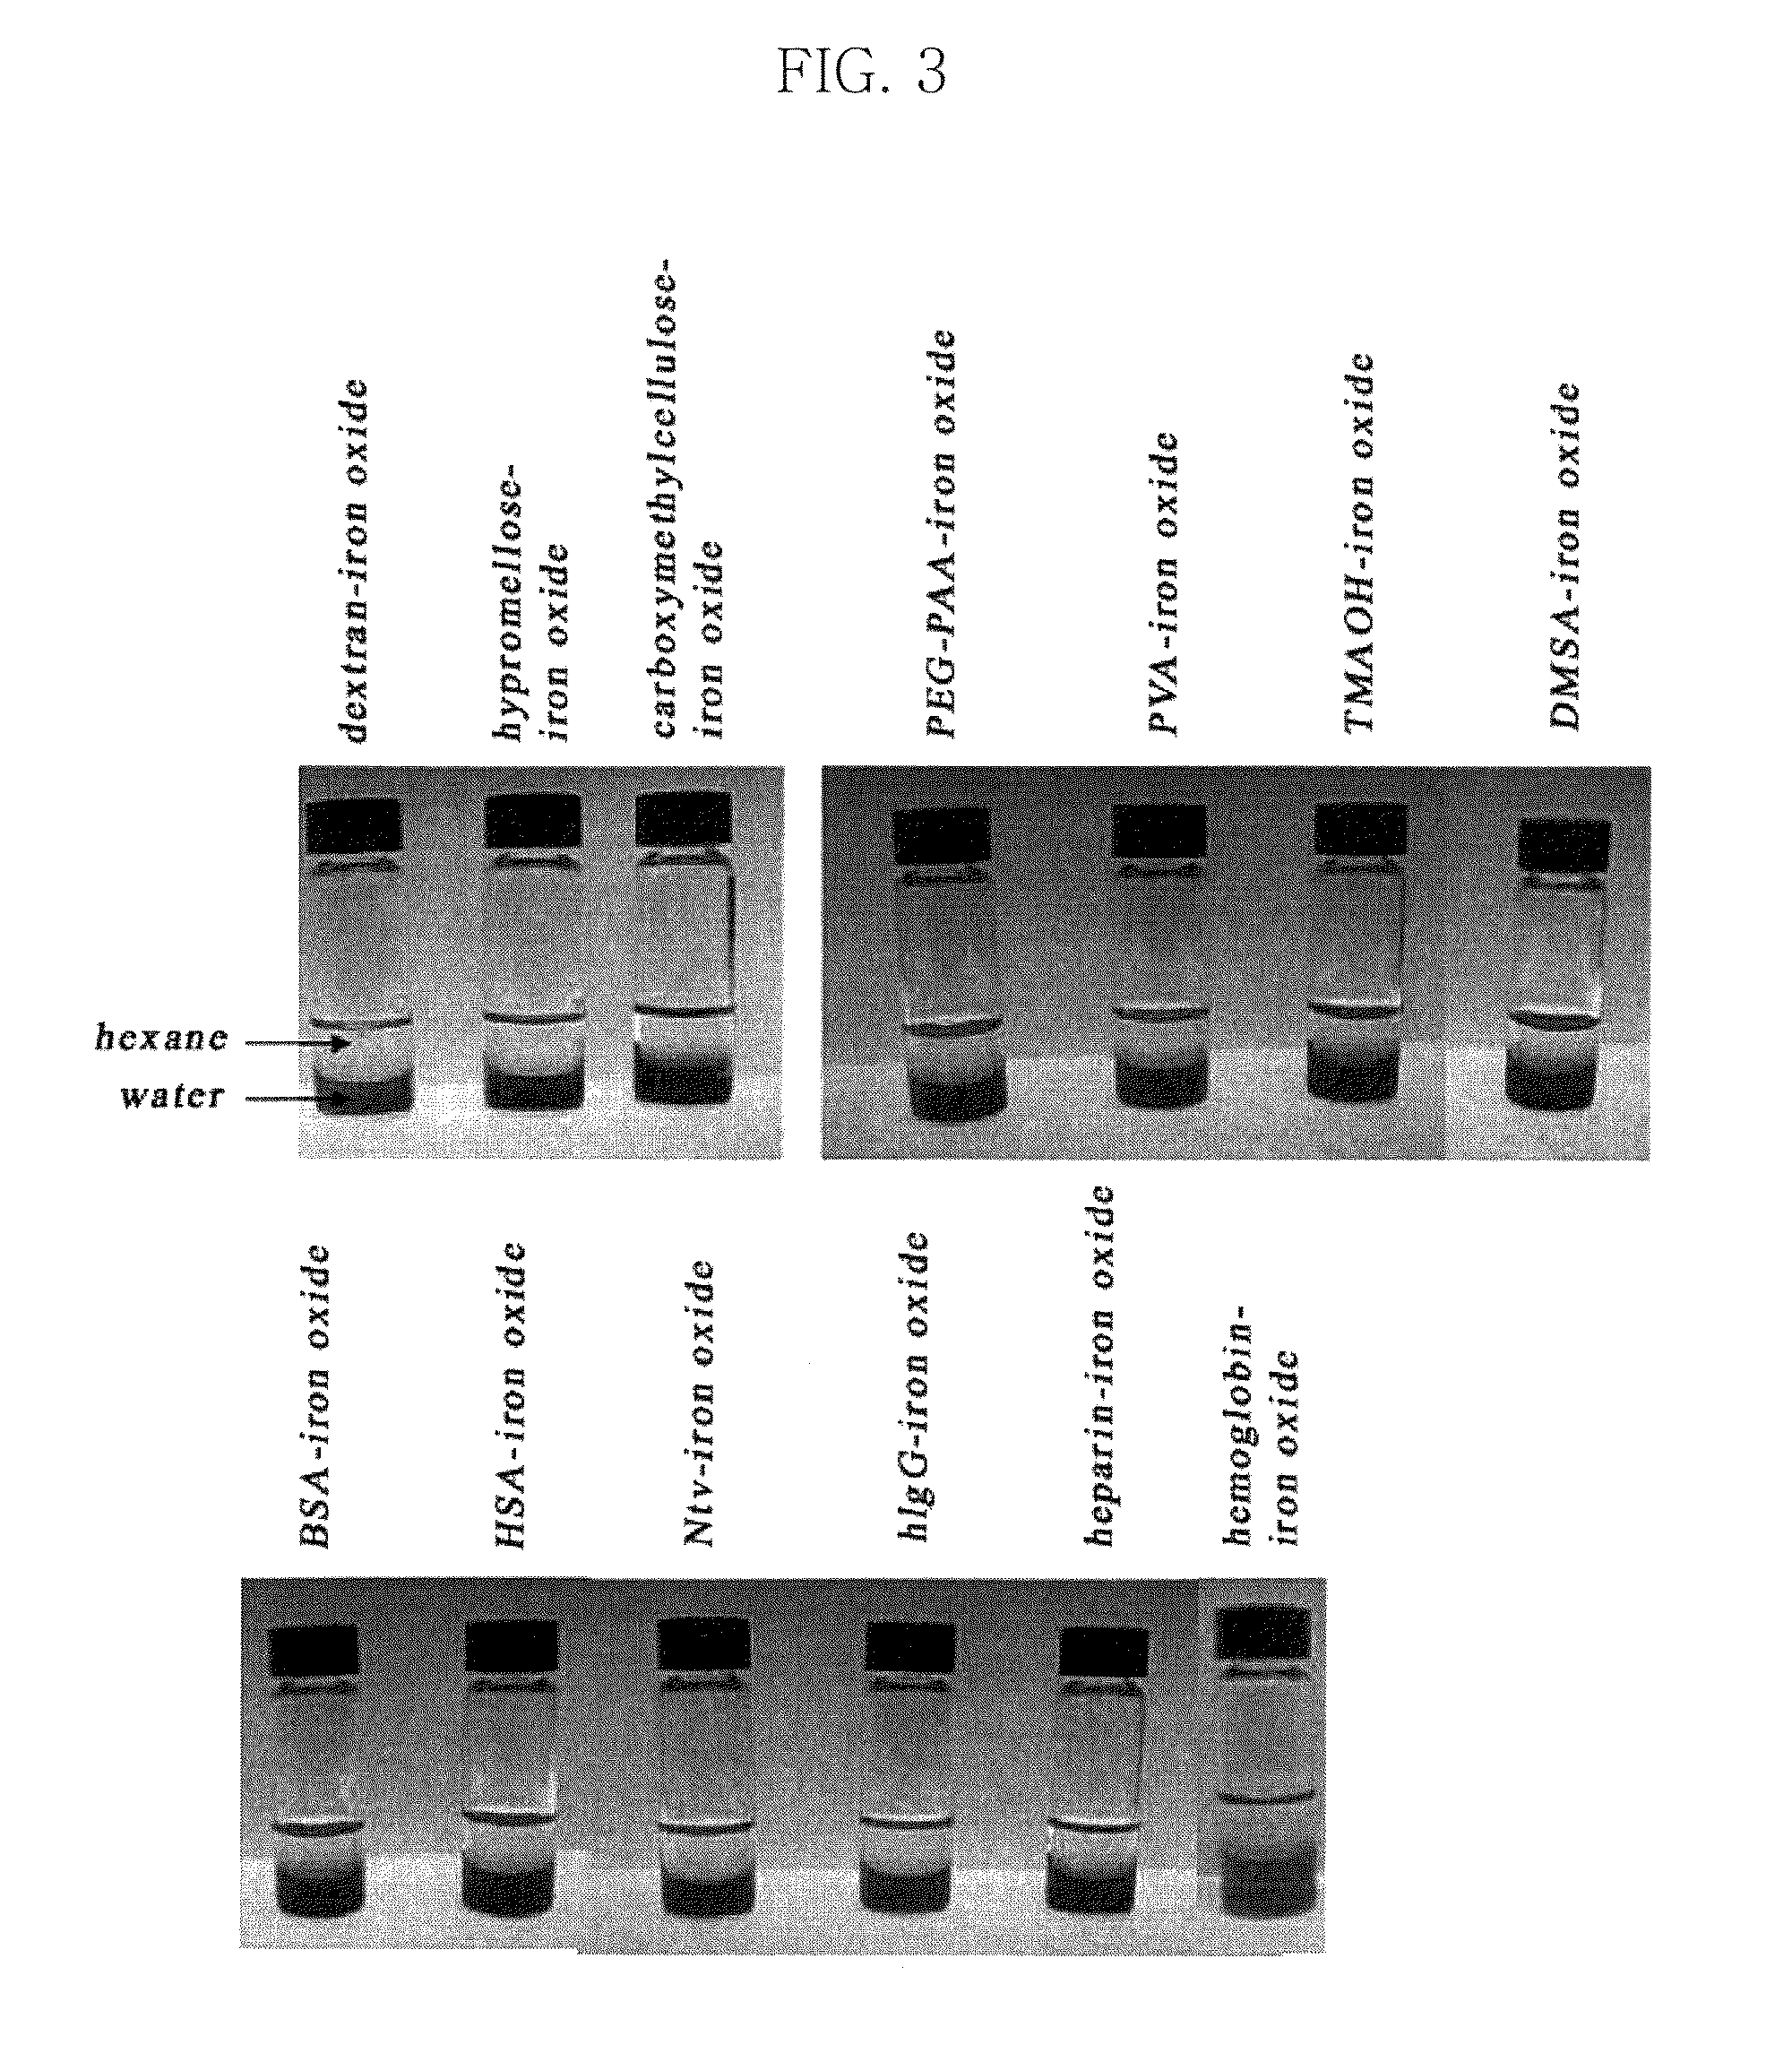 Water-soluble magnetic or metal oxide nanoparticles coated with ligands, preparation method and usage thereof